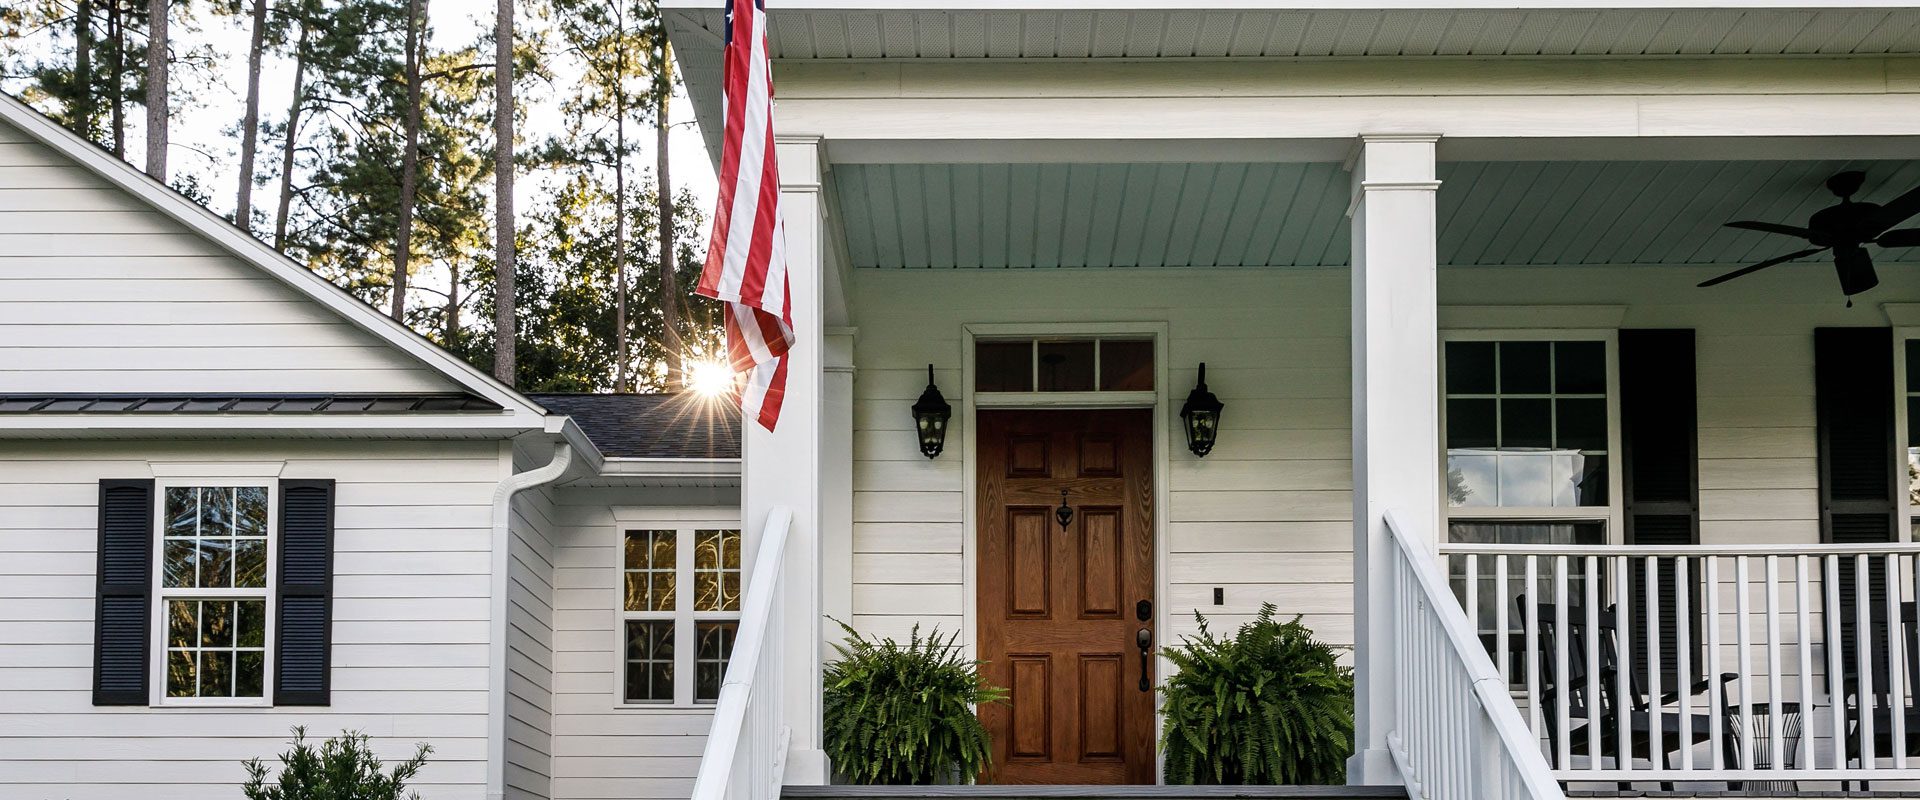 A house with american flag on the front porch.